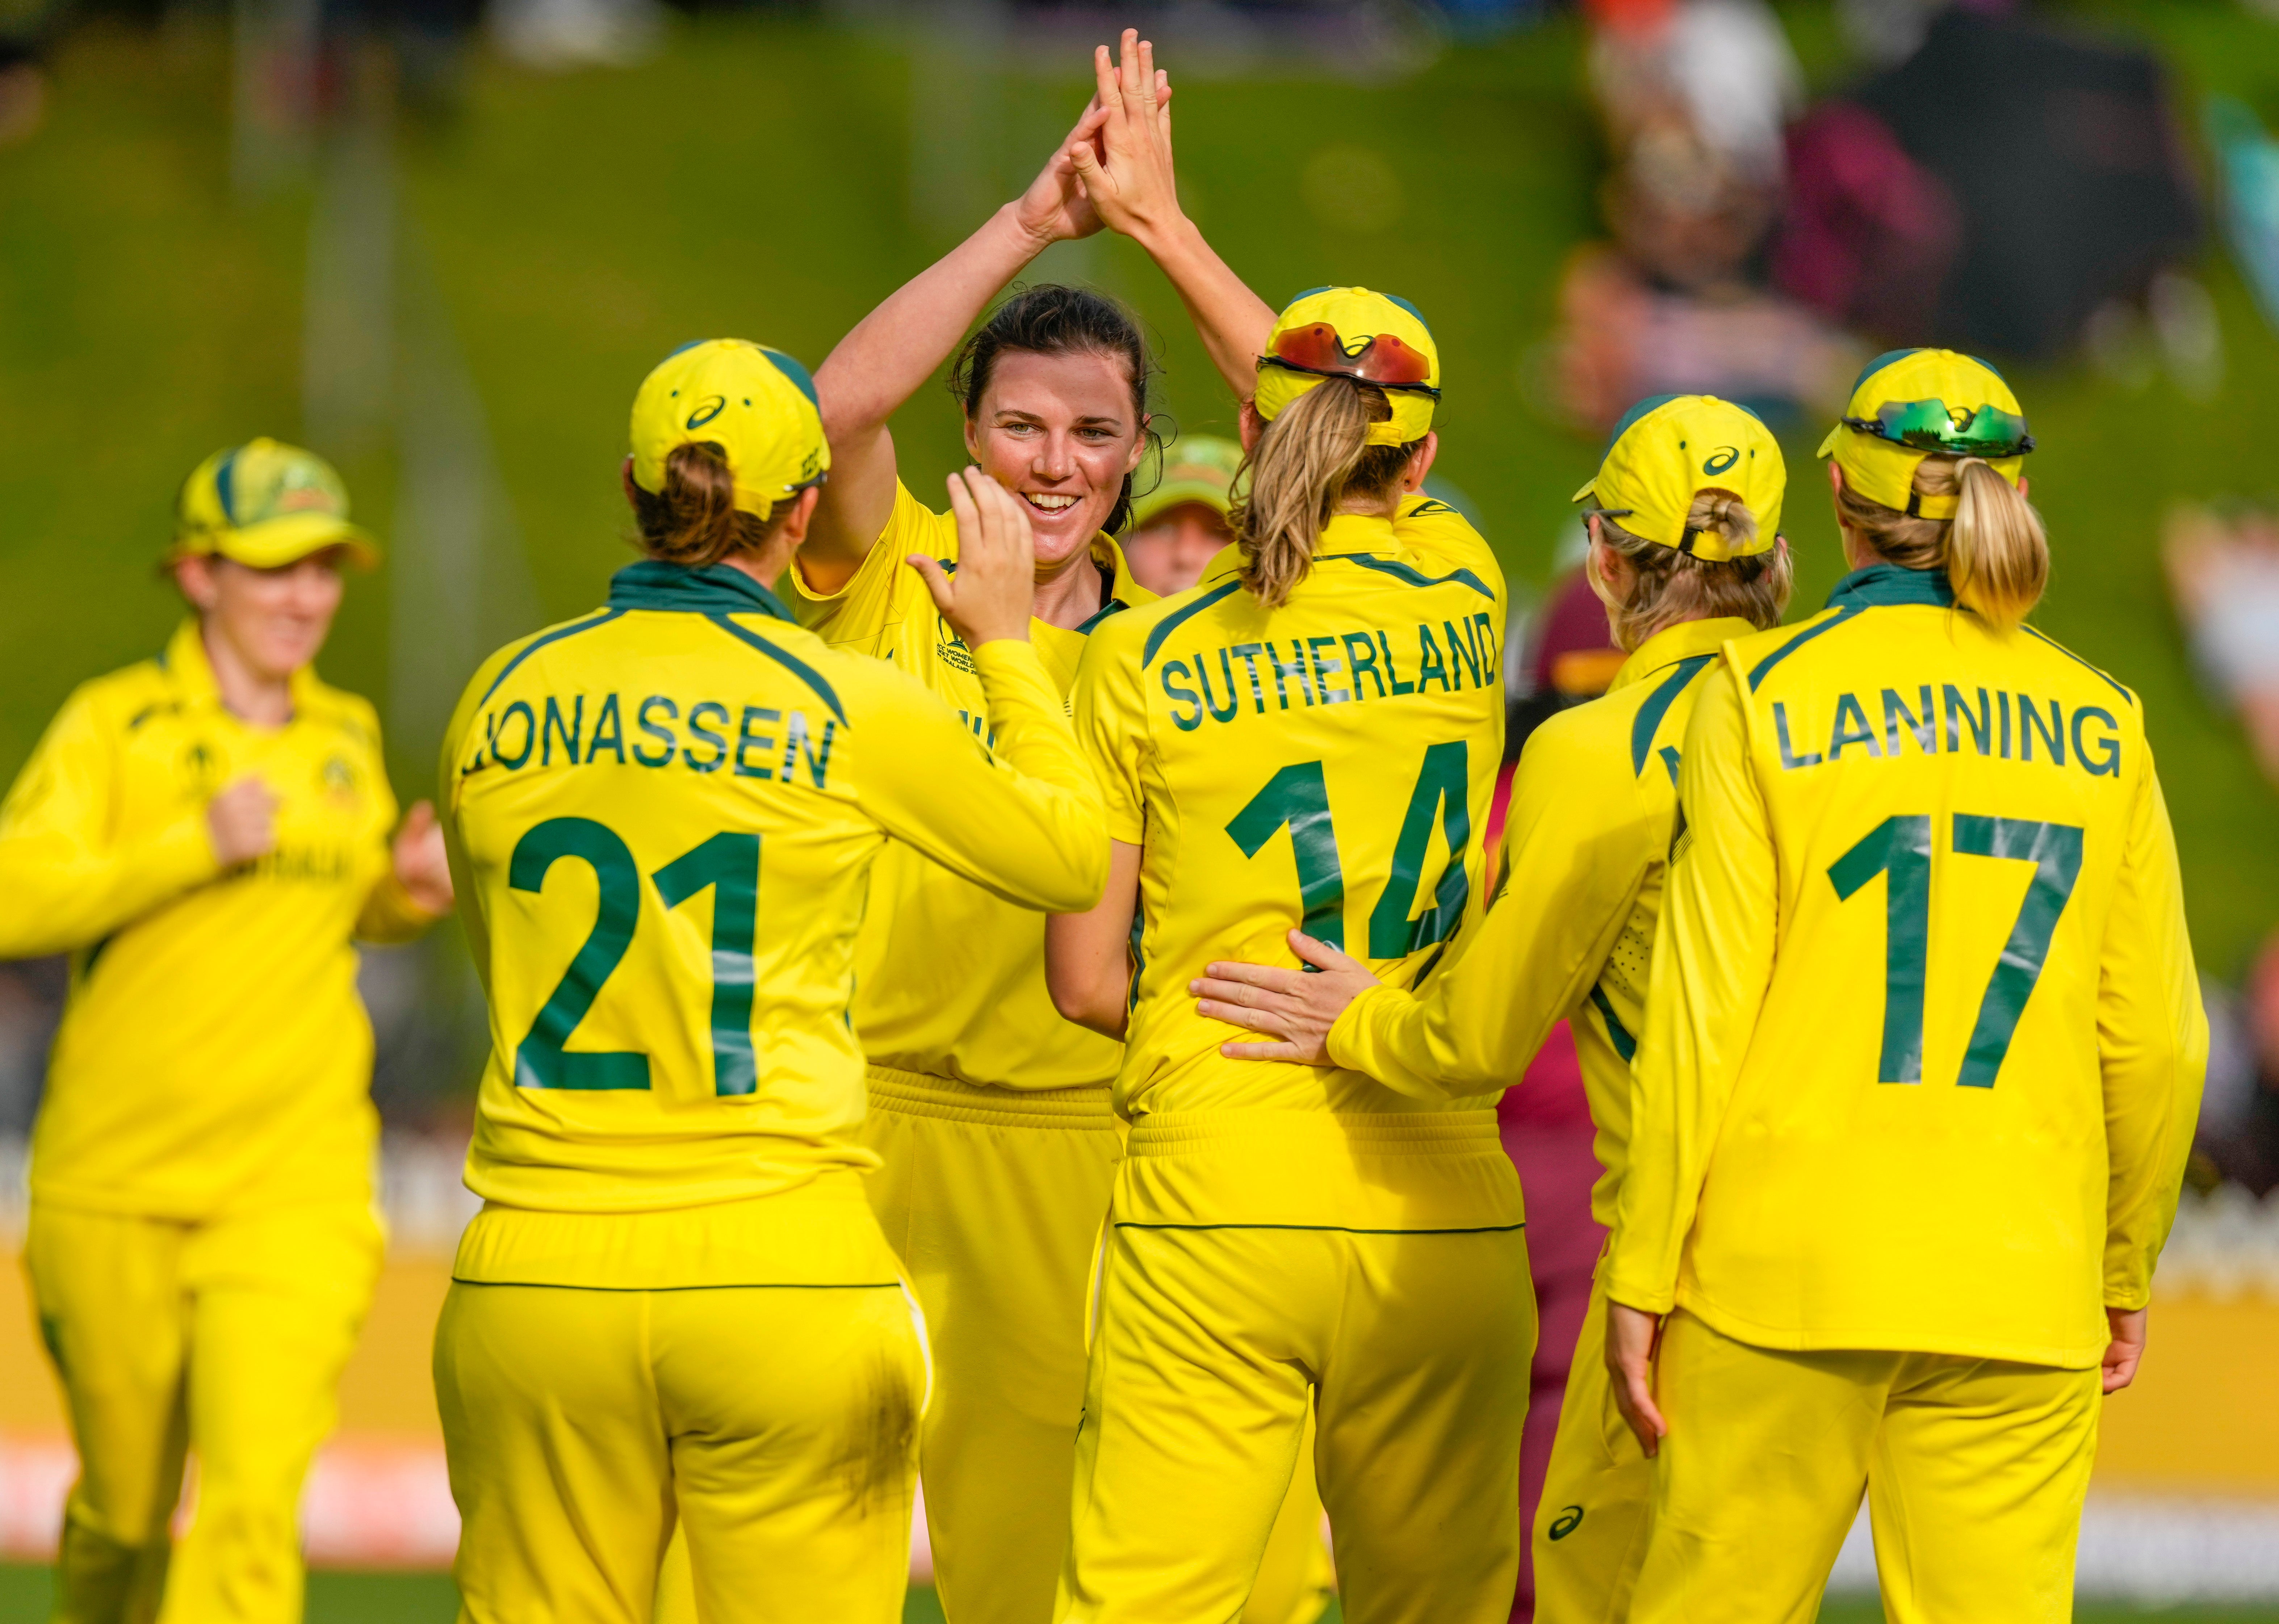 England did not win a single match in the women’s Ashes against Australia (pictured), who remain unbeaten in the World Cup (John Cowpland/Photosport via AP)